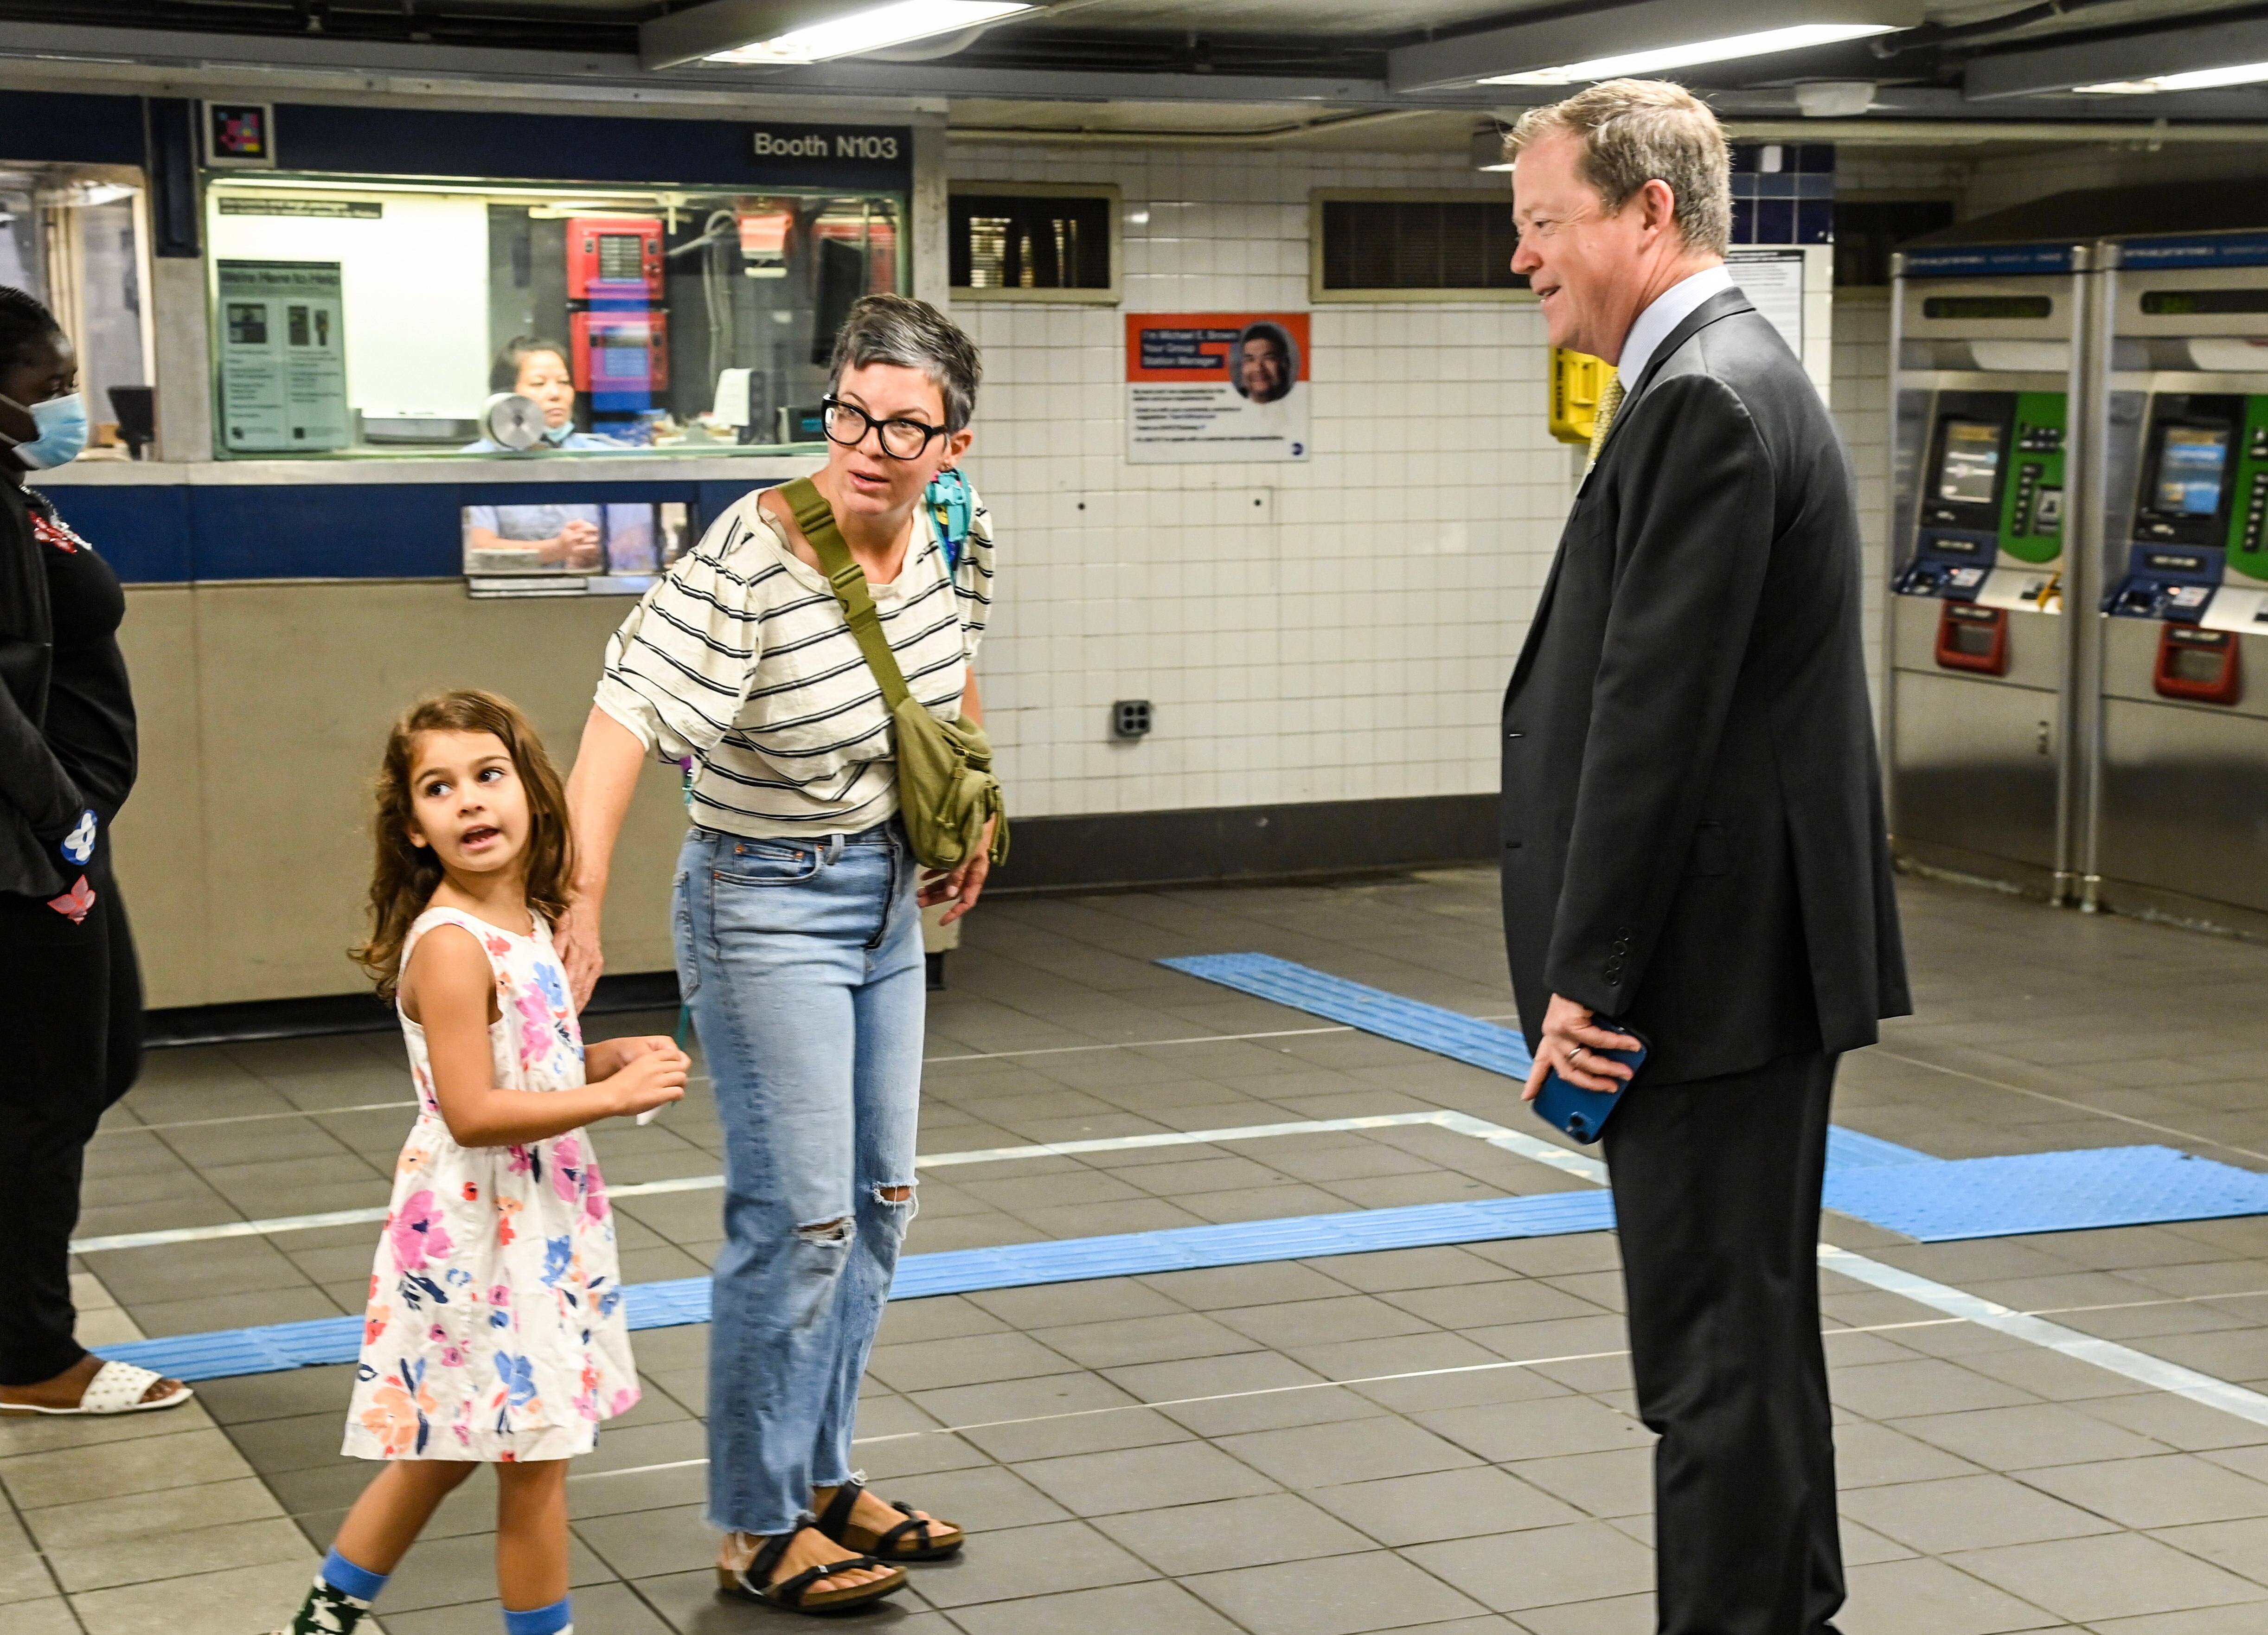 PHOTOS: New York City Transit President Davey Welcomes NYC Students Back to the Transit System